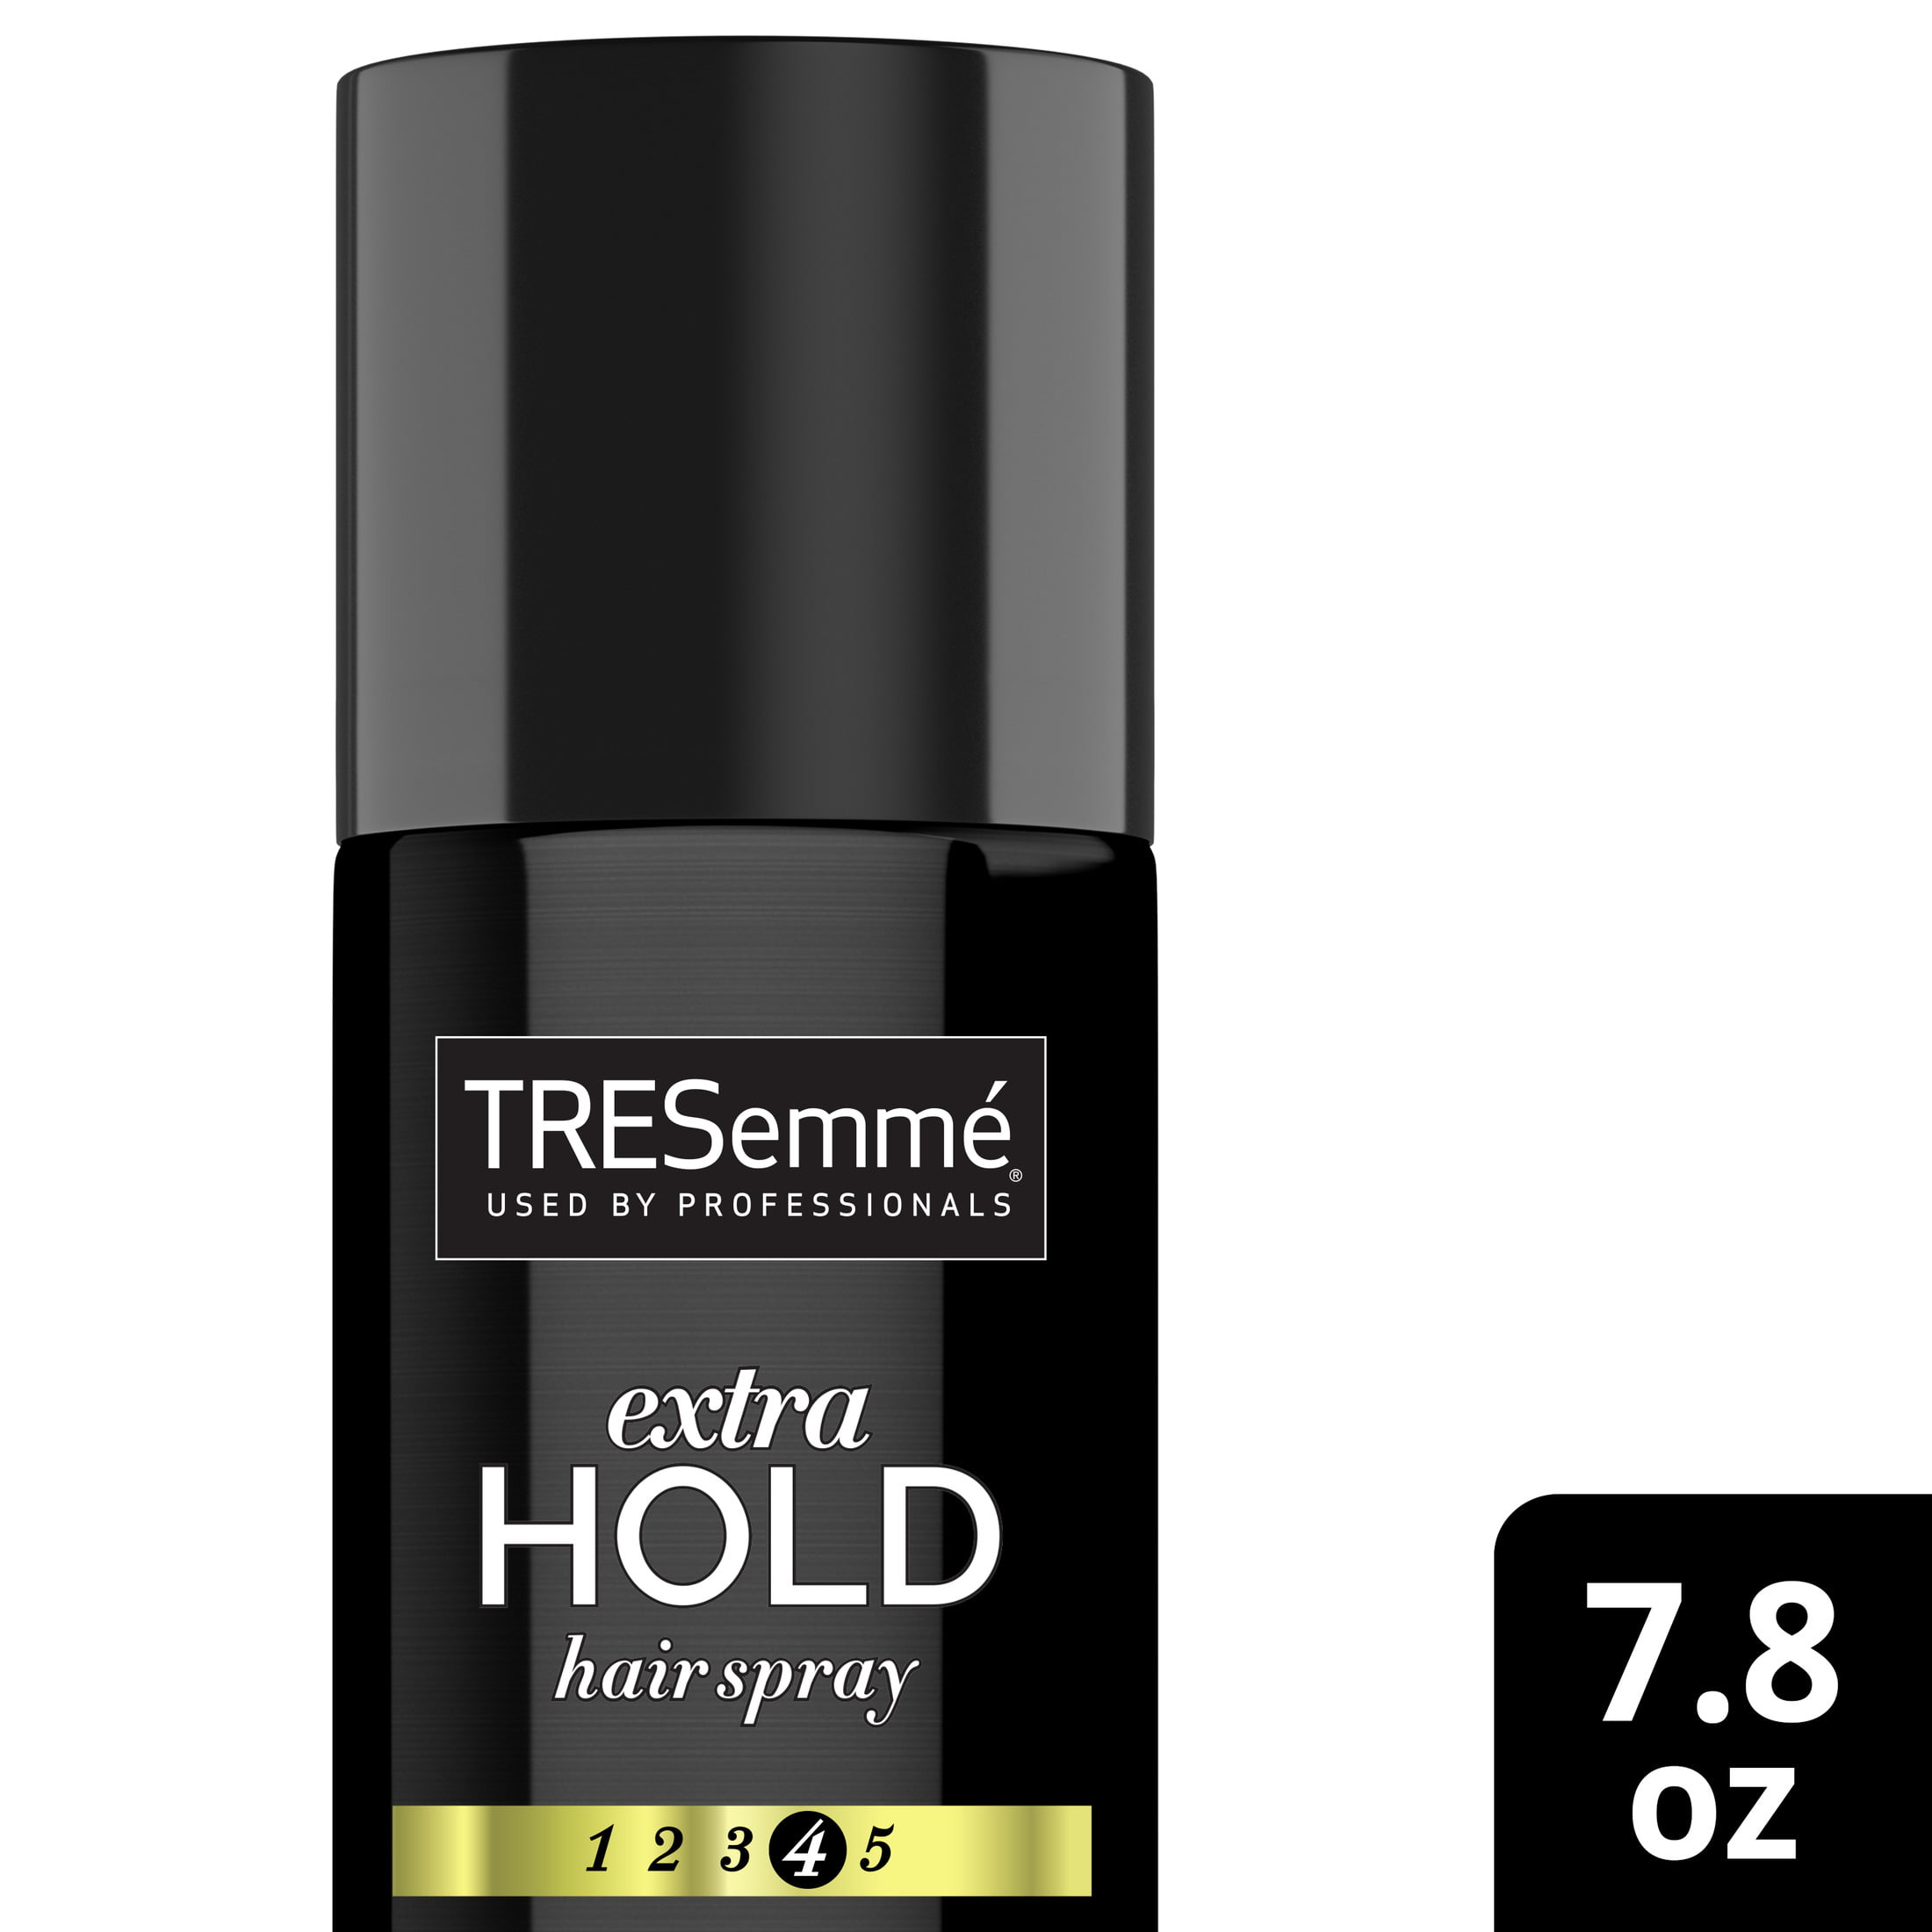 Tresemme Extra Hold Hair Spray Anti-Frizz Hairspray With All-Day Humidity Resistance, 7.8 oz